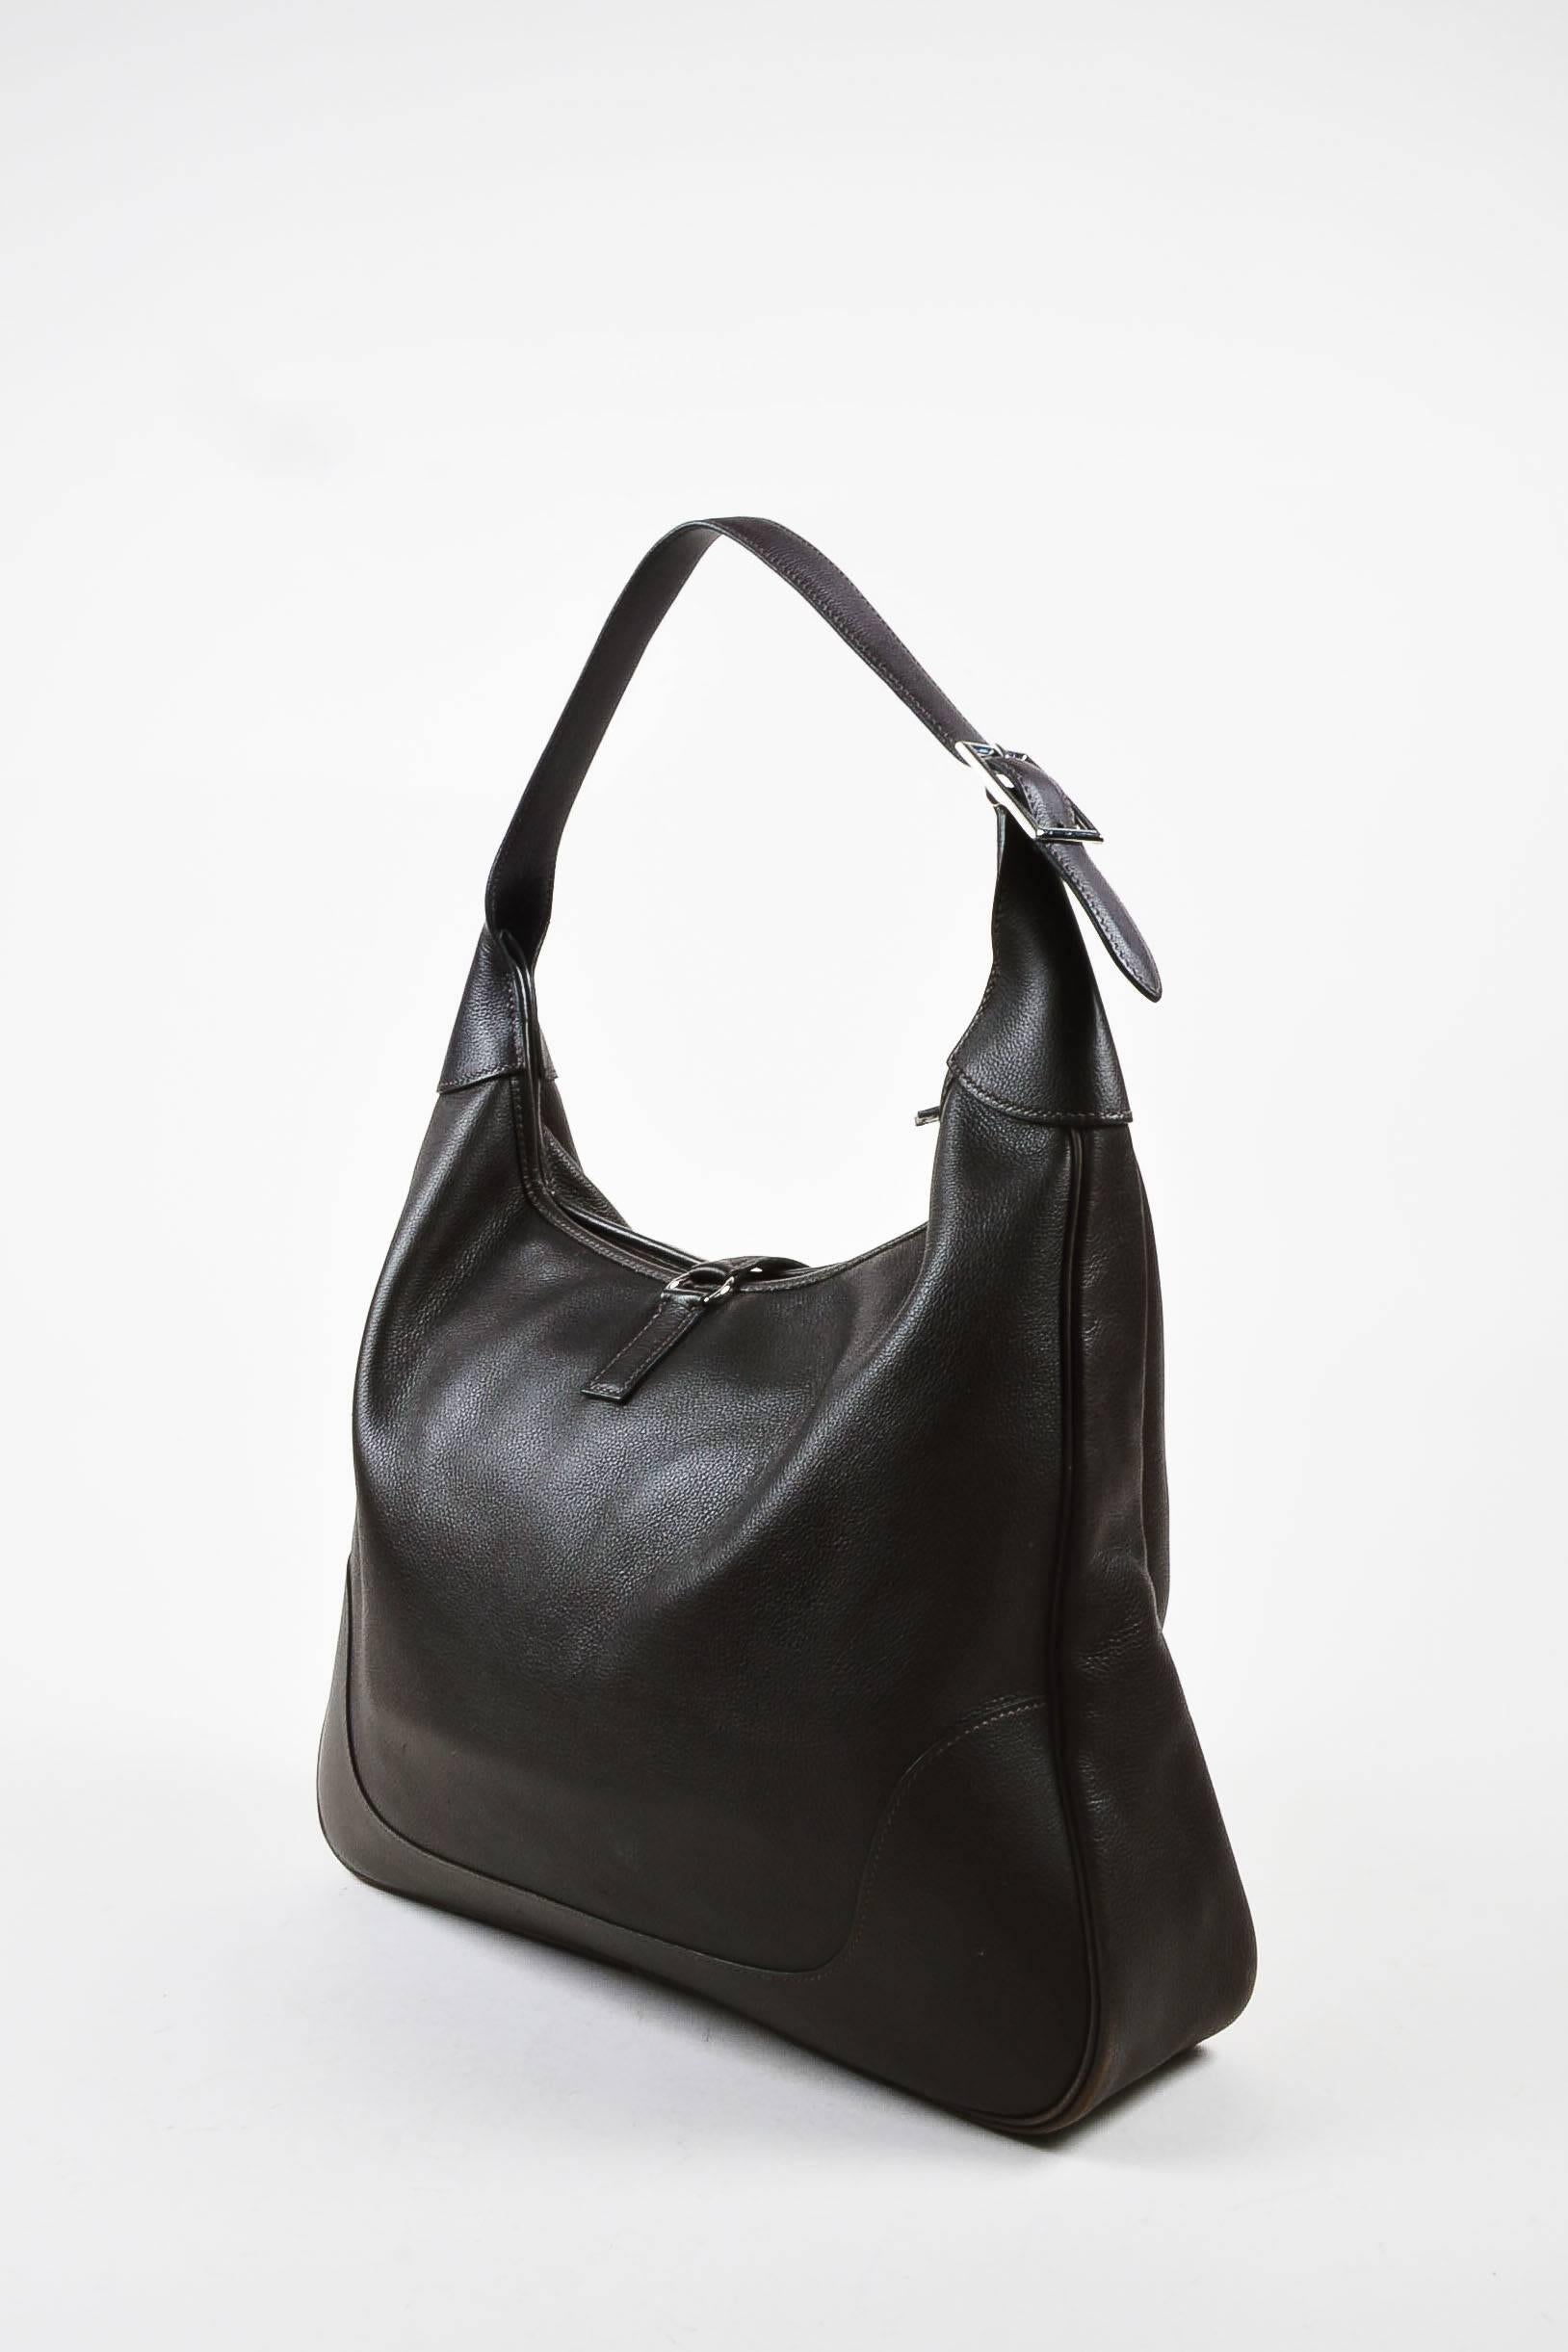 One of Hermes' most classic and iconic bag designs. A favorite of style icon Jackie O. Brown 